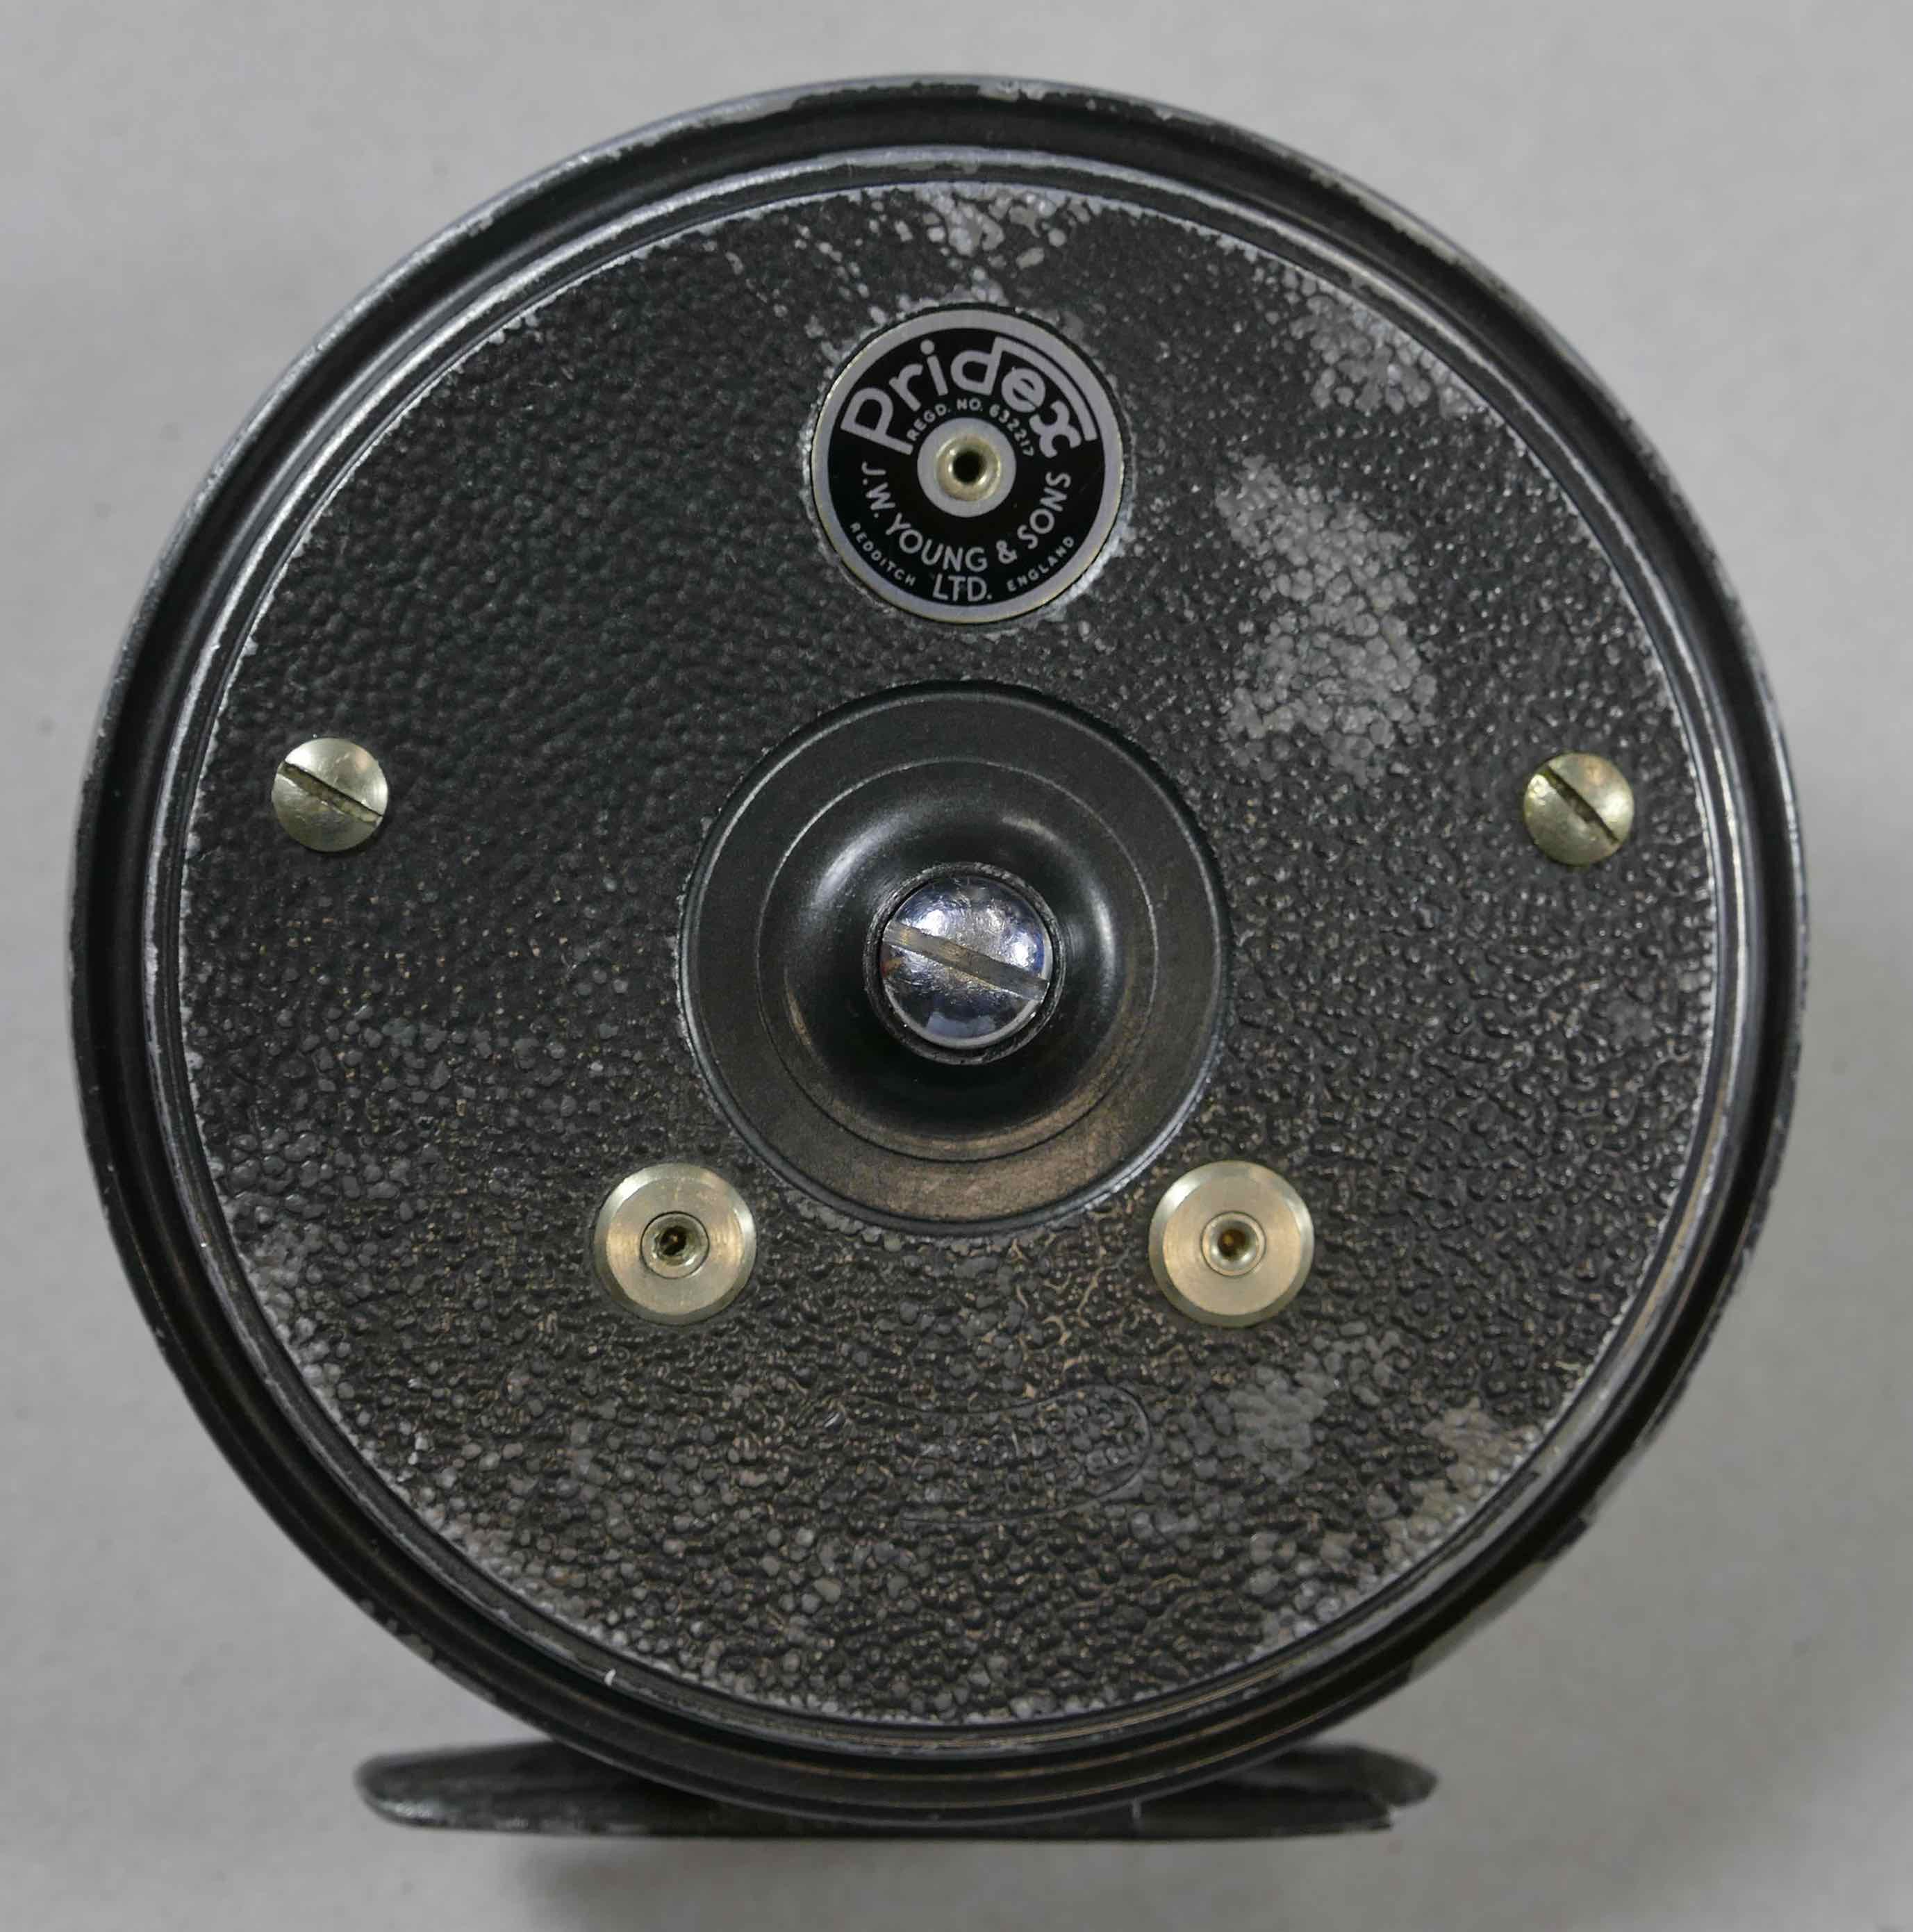 J. W. Young Pridex dual pawl fly reel in very good shape - $75.00